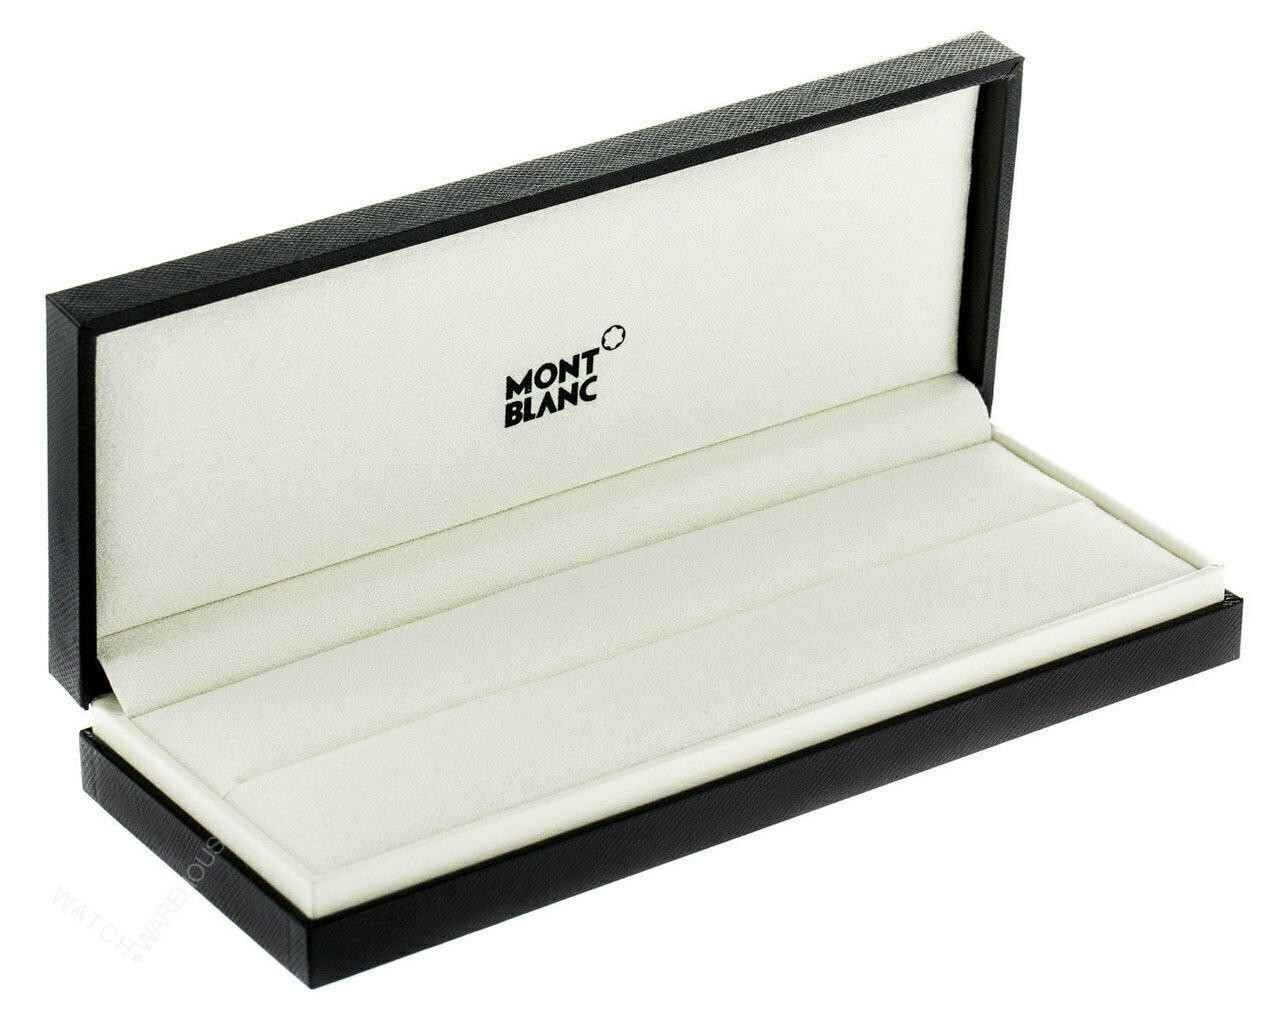 GOMME BLANCHE 11042-T30 – Horizon stationery